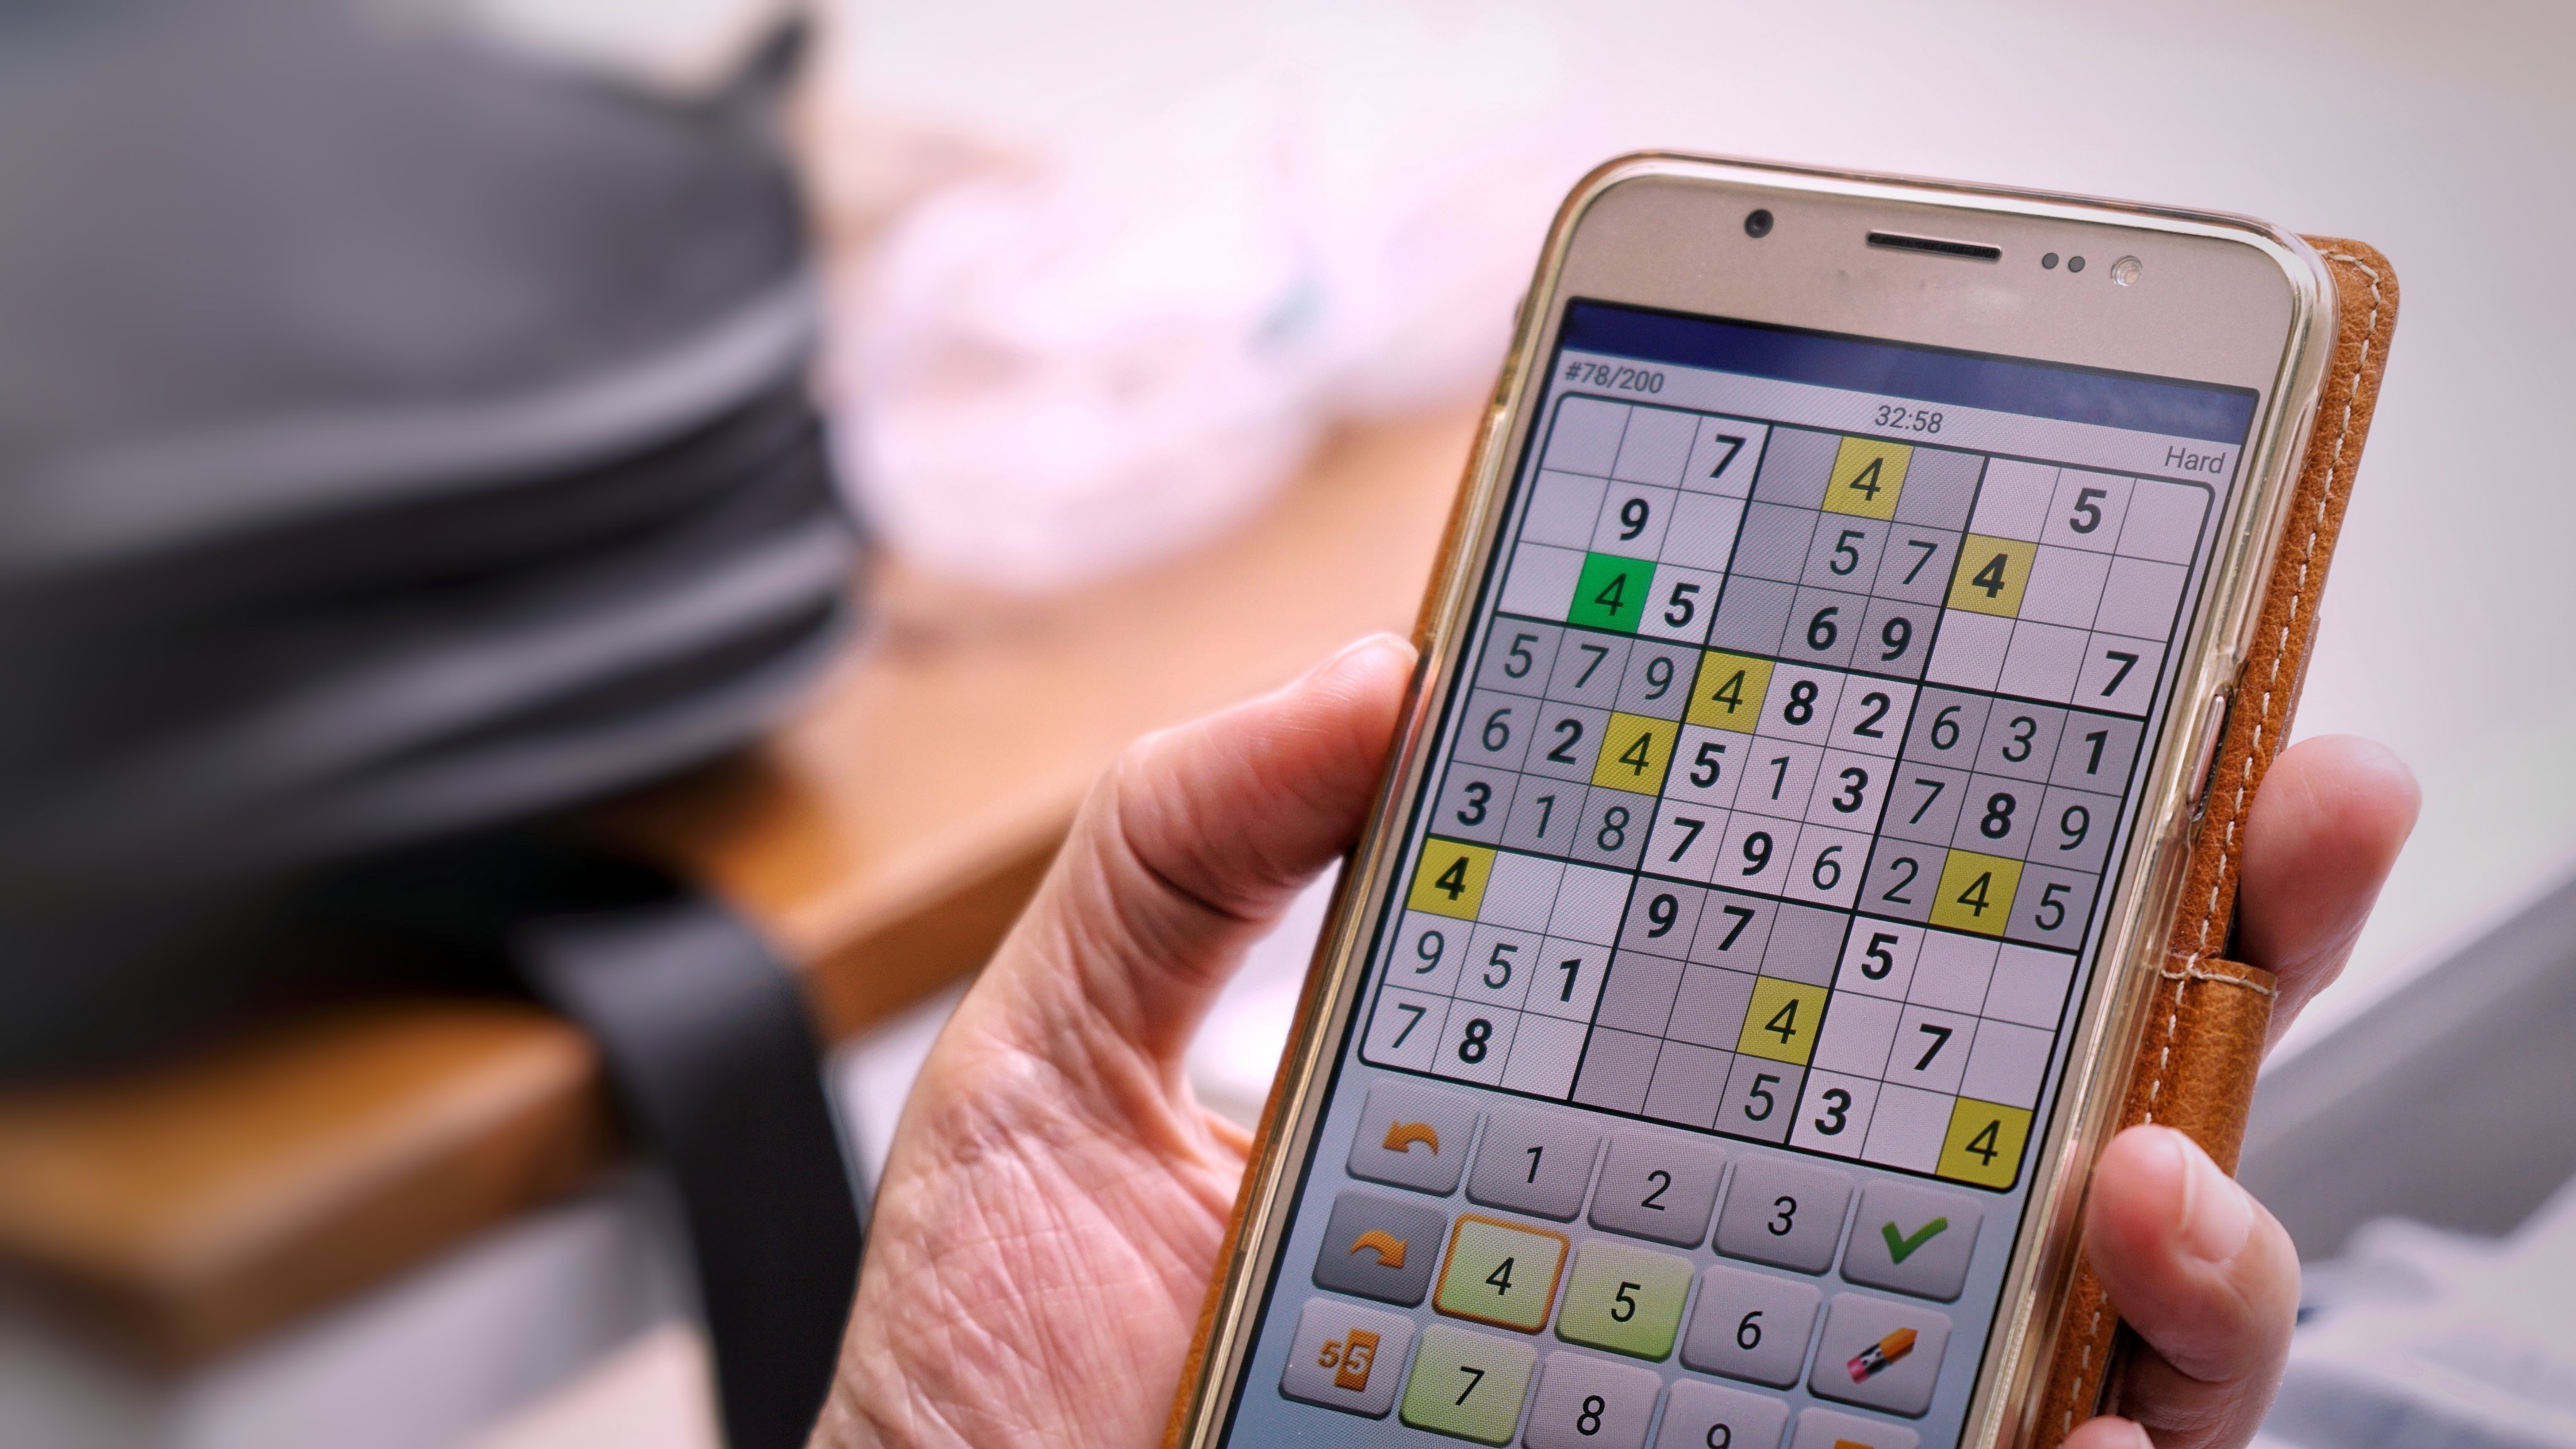 Playing brain game apps helps fight dementia, but they have to be challenging and preferably unfamiliar, say experts. Reading, doing jigsaw puzzles and chess are also beneficial for the brain. Photo: Shutterstock